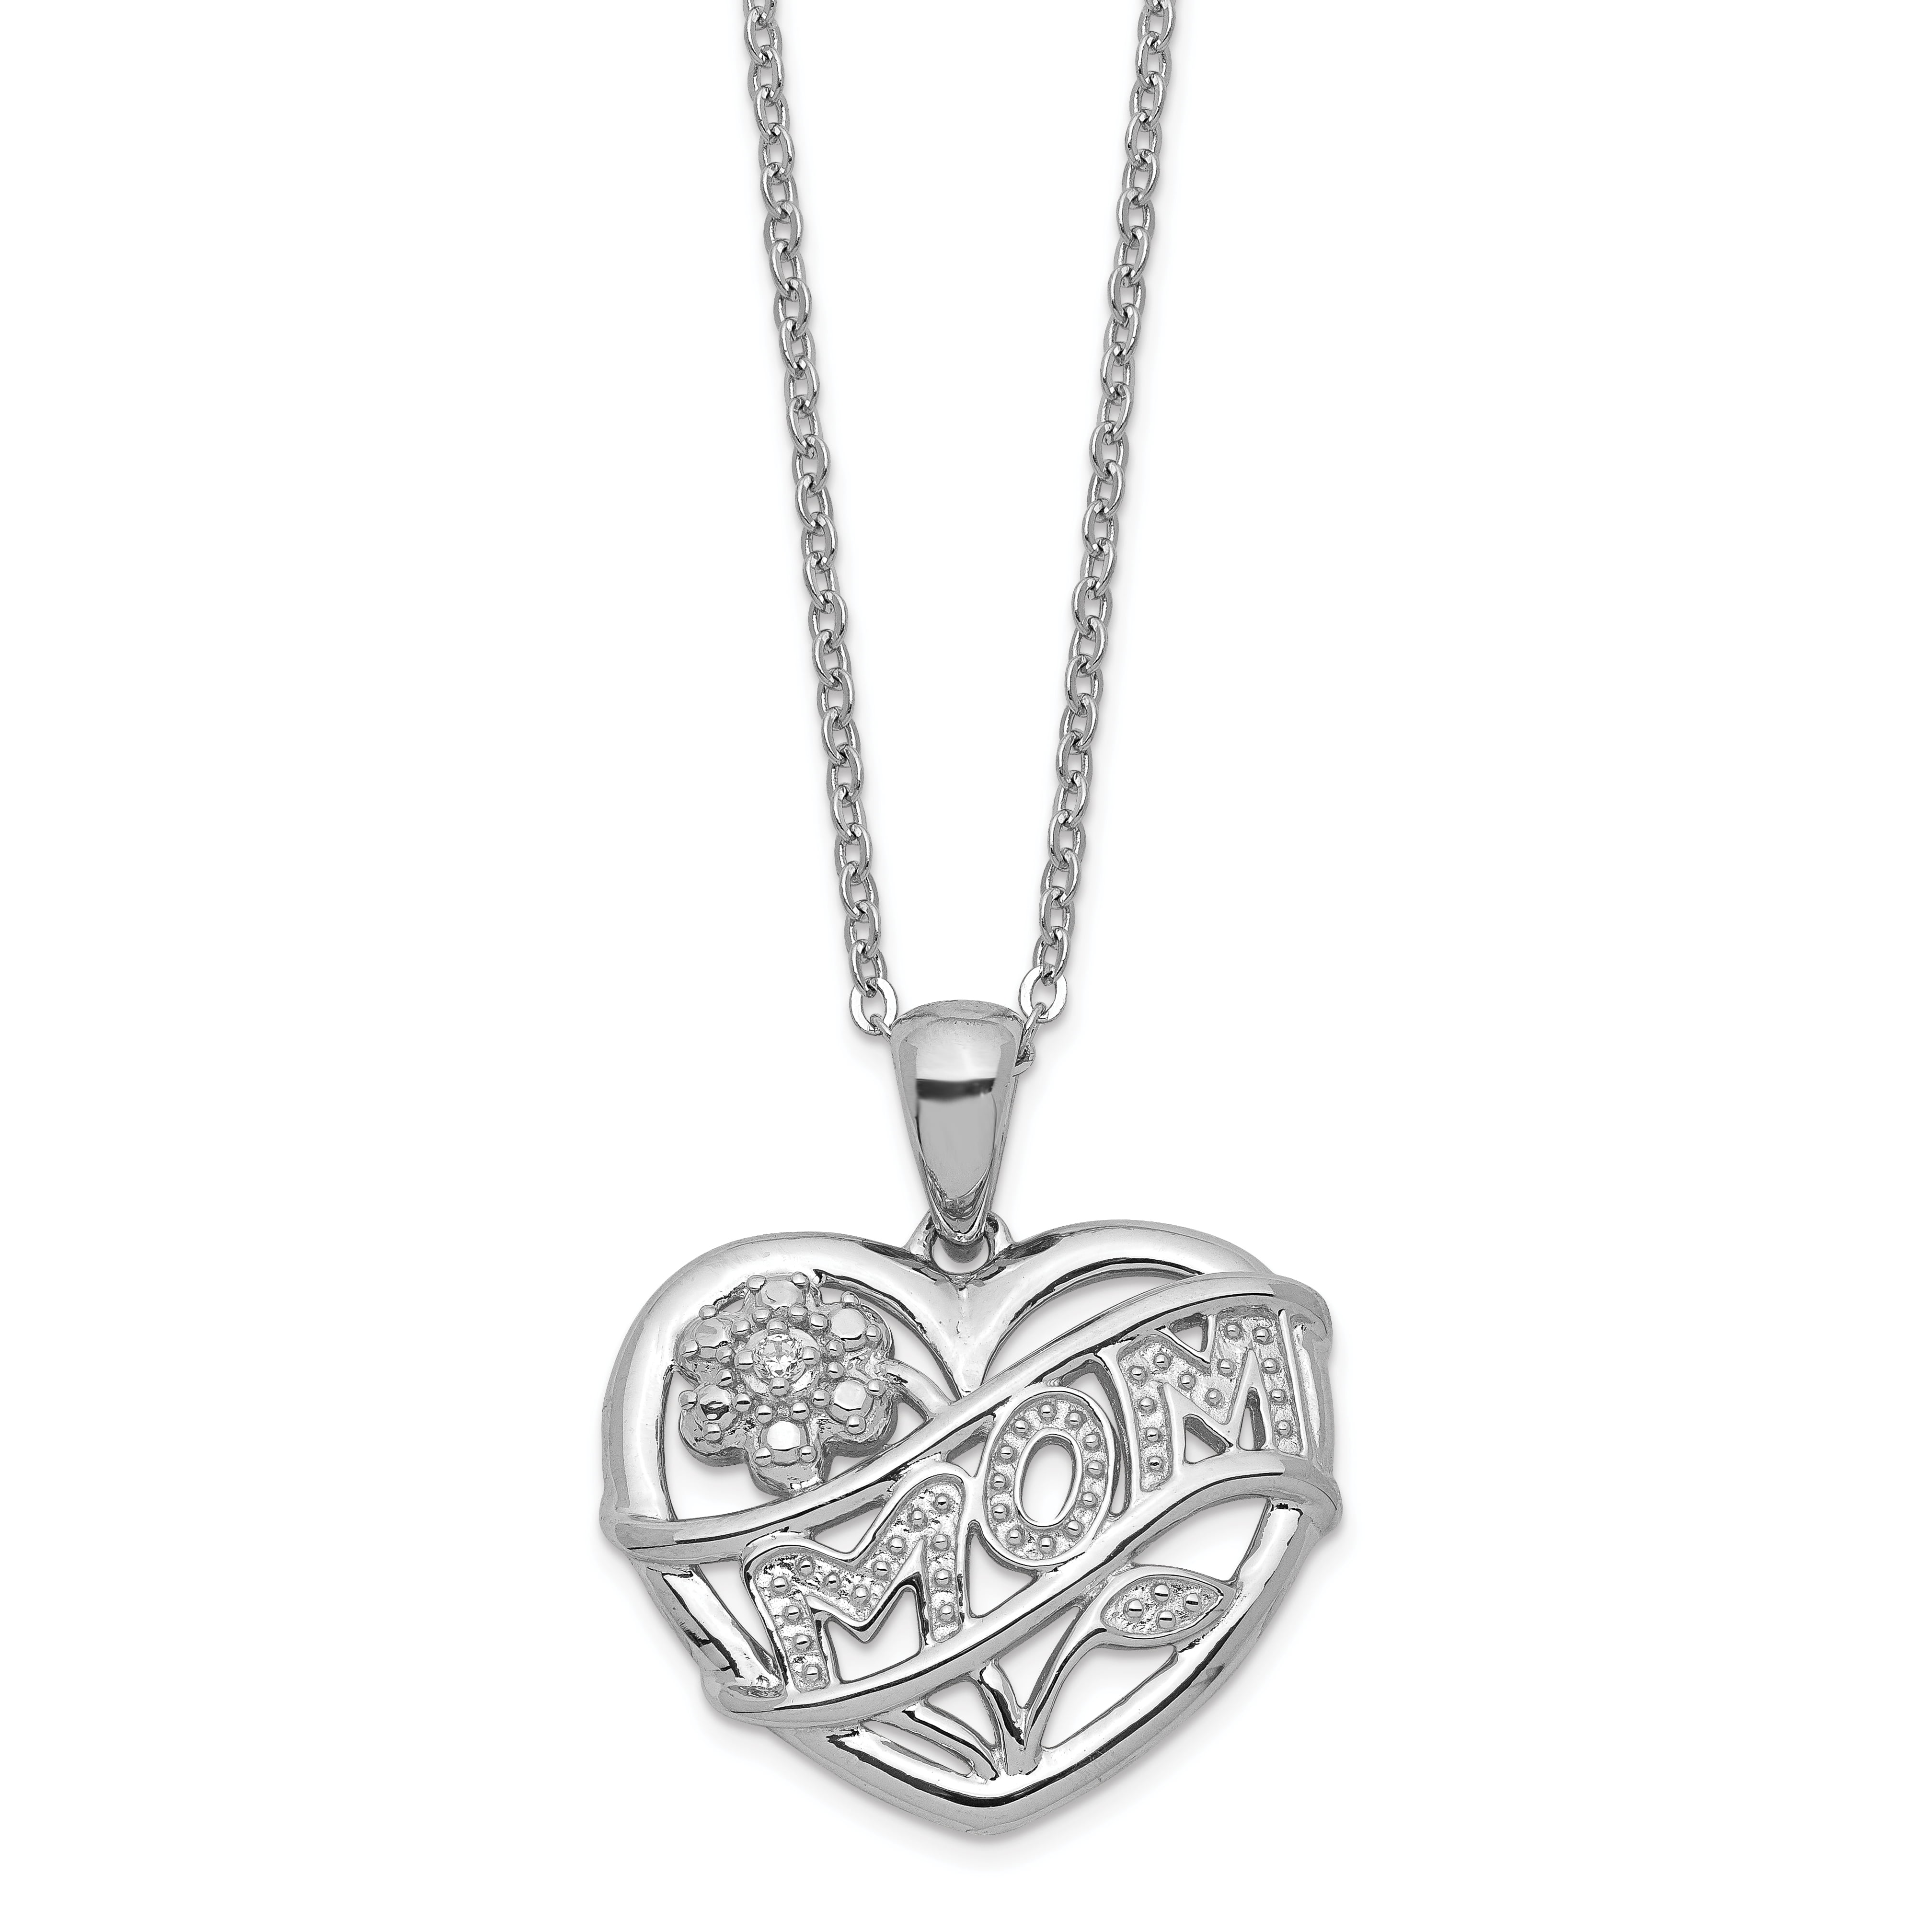 925 Sterling Silver Heart On Link Box Chain Necklace Pendant Charm S/love Fine Jewelry Gifts For Women For Her